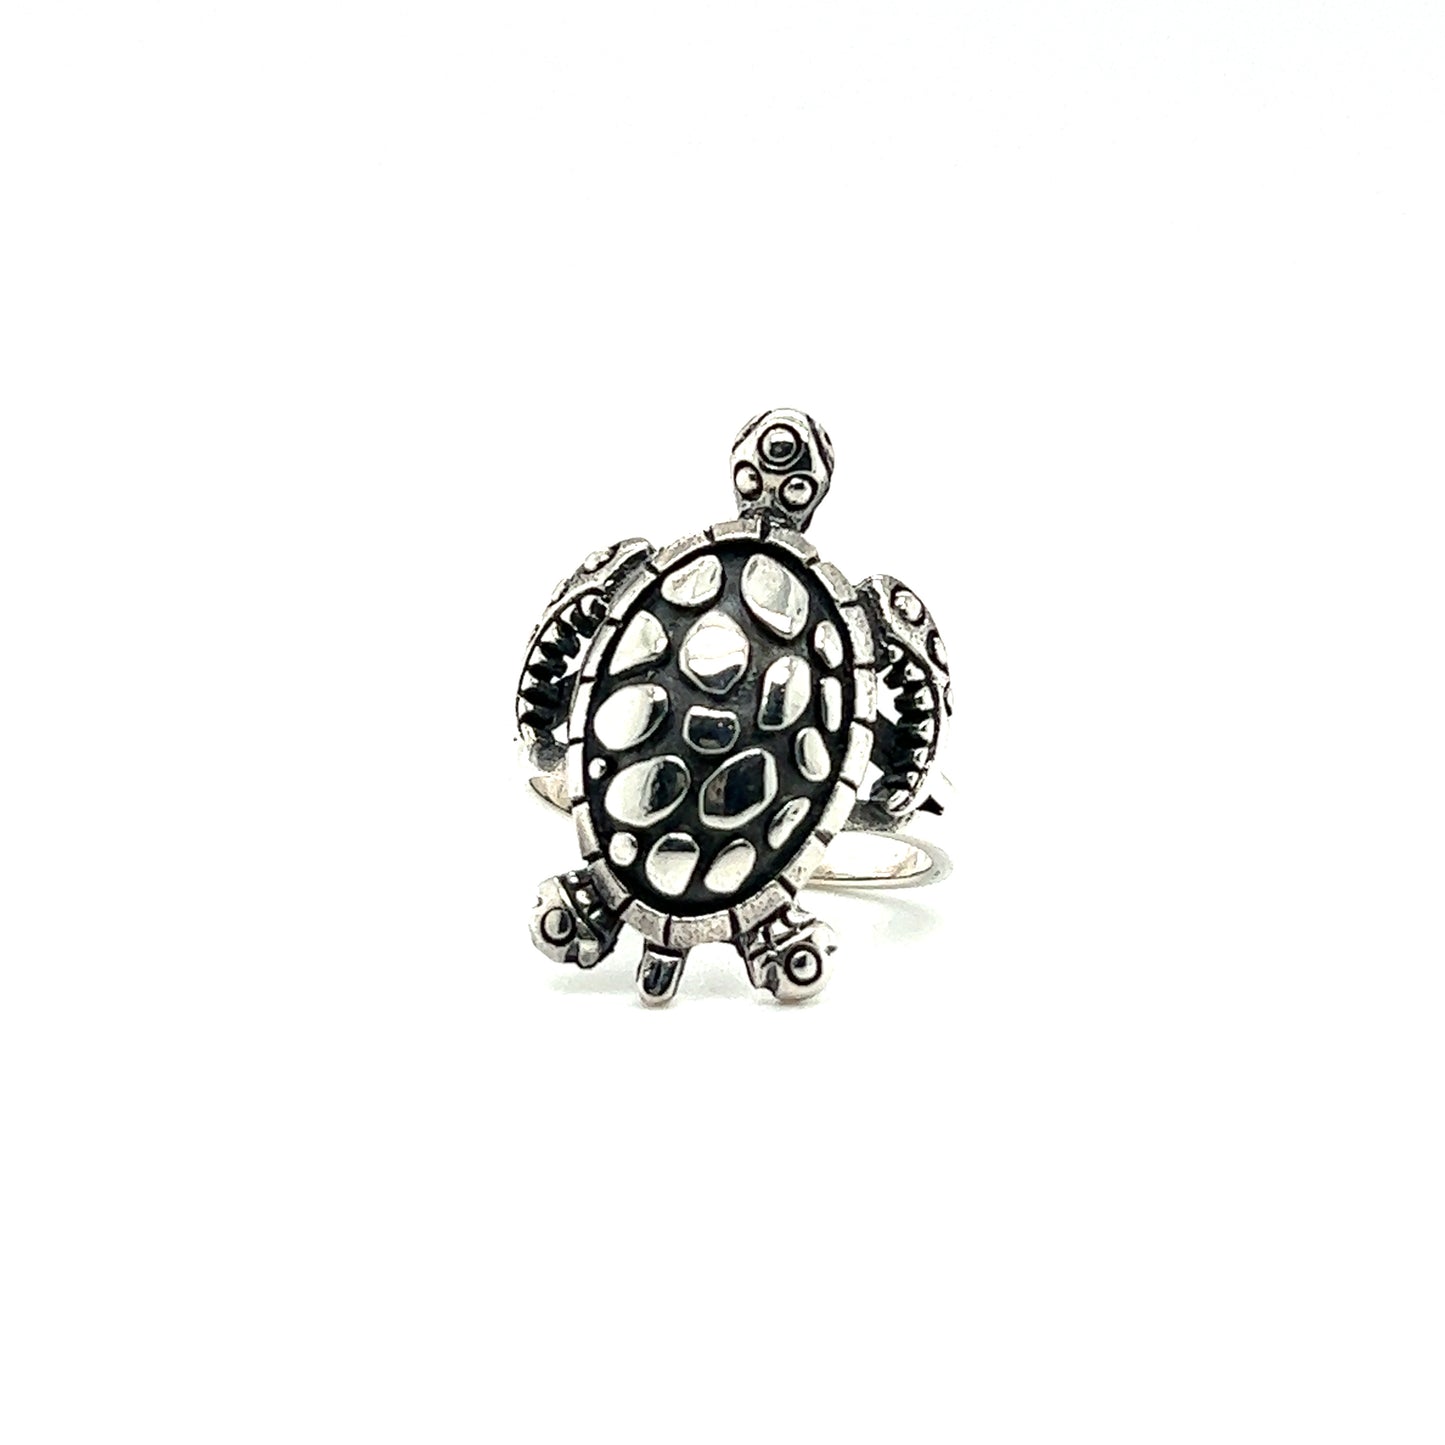 A Large Sea Turtle Ring on a white background.